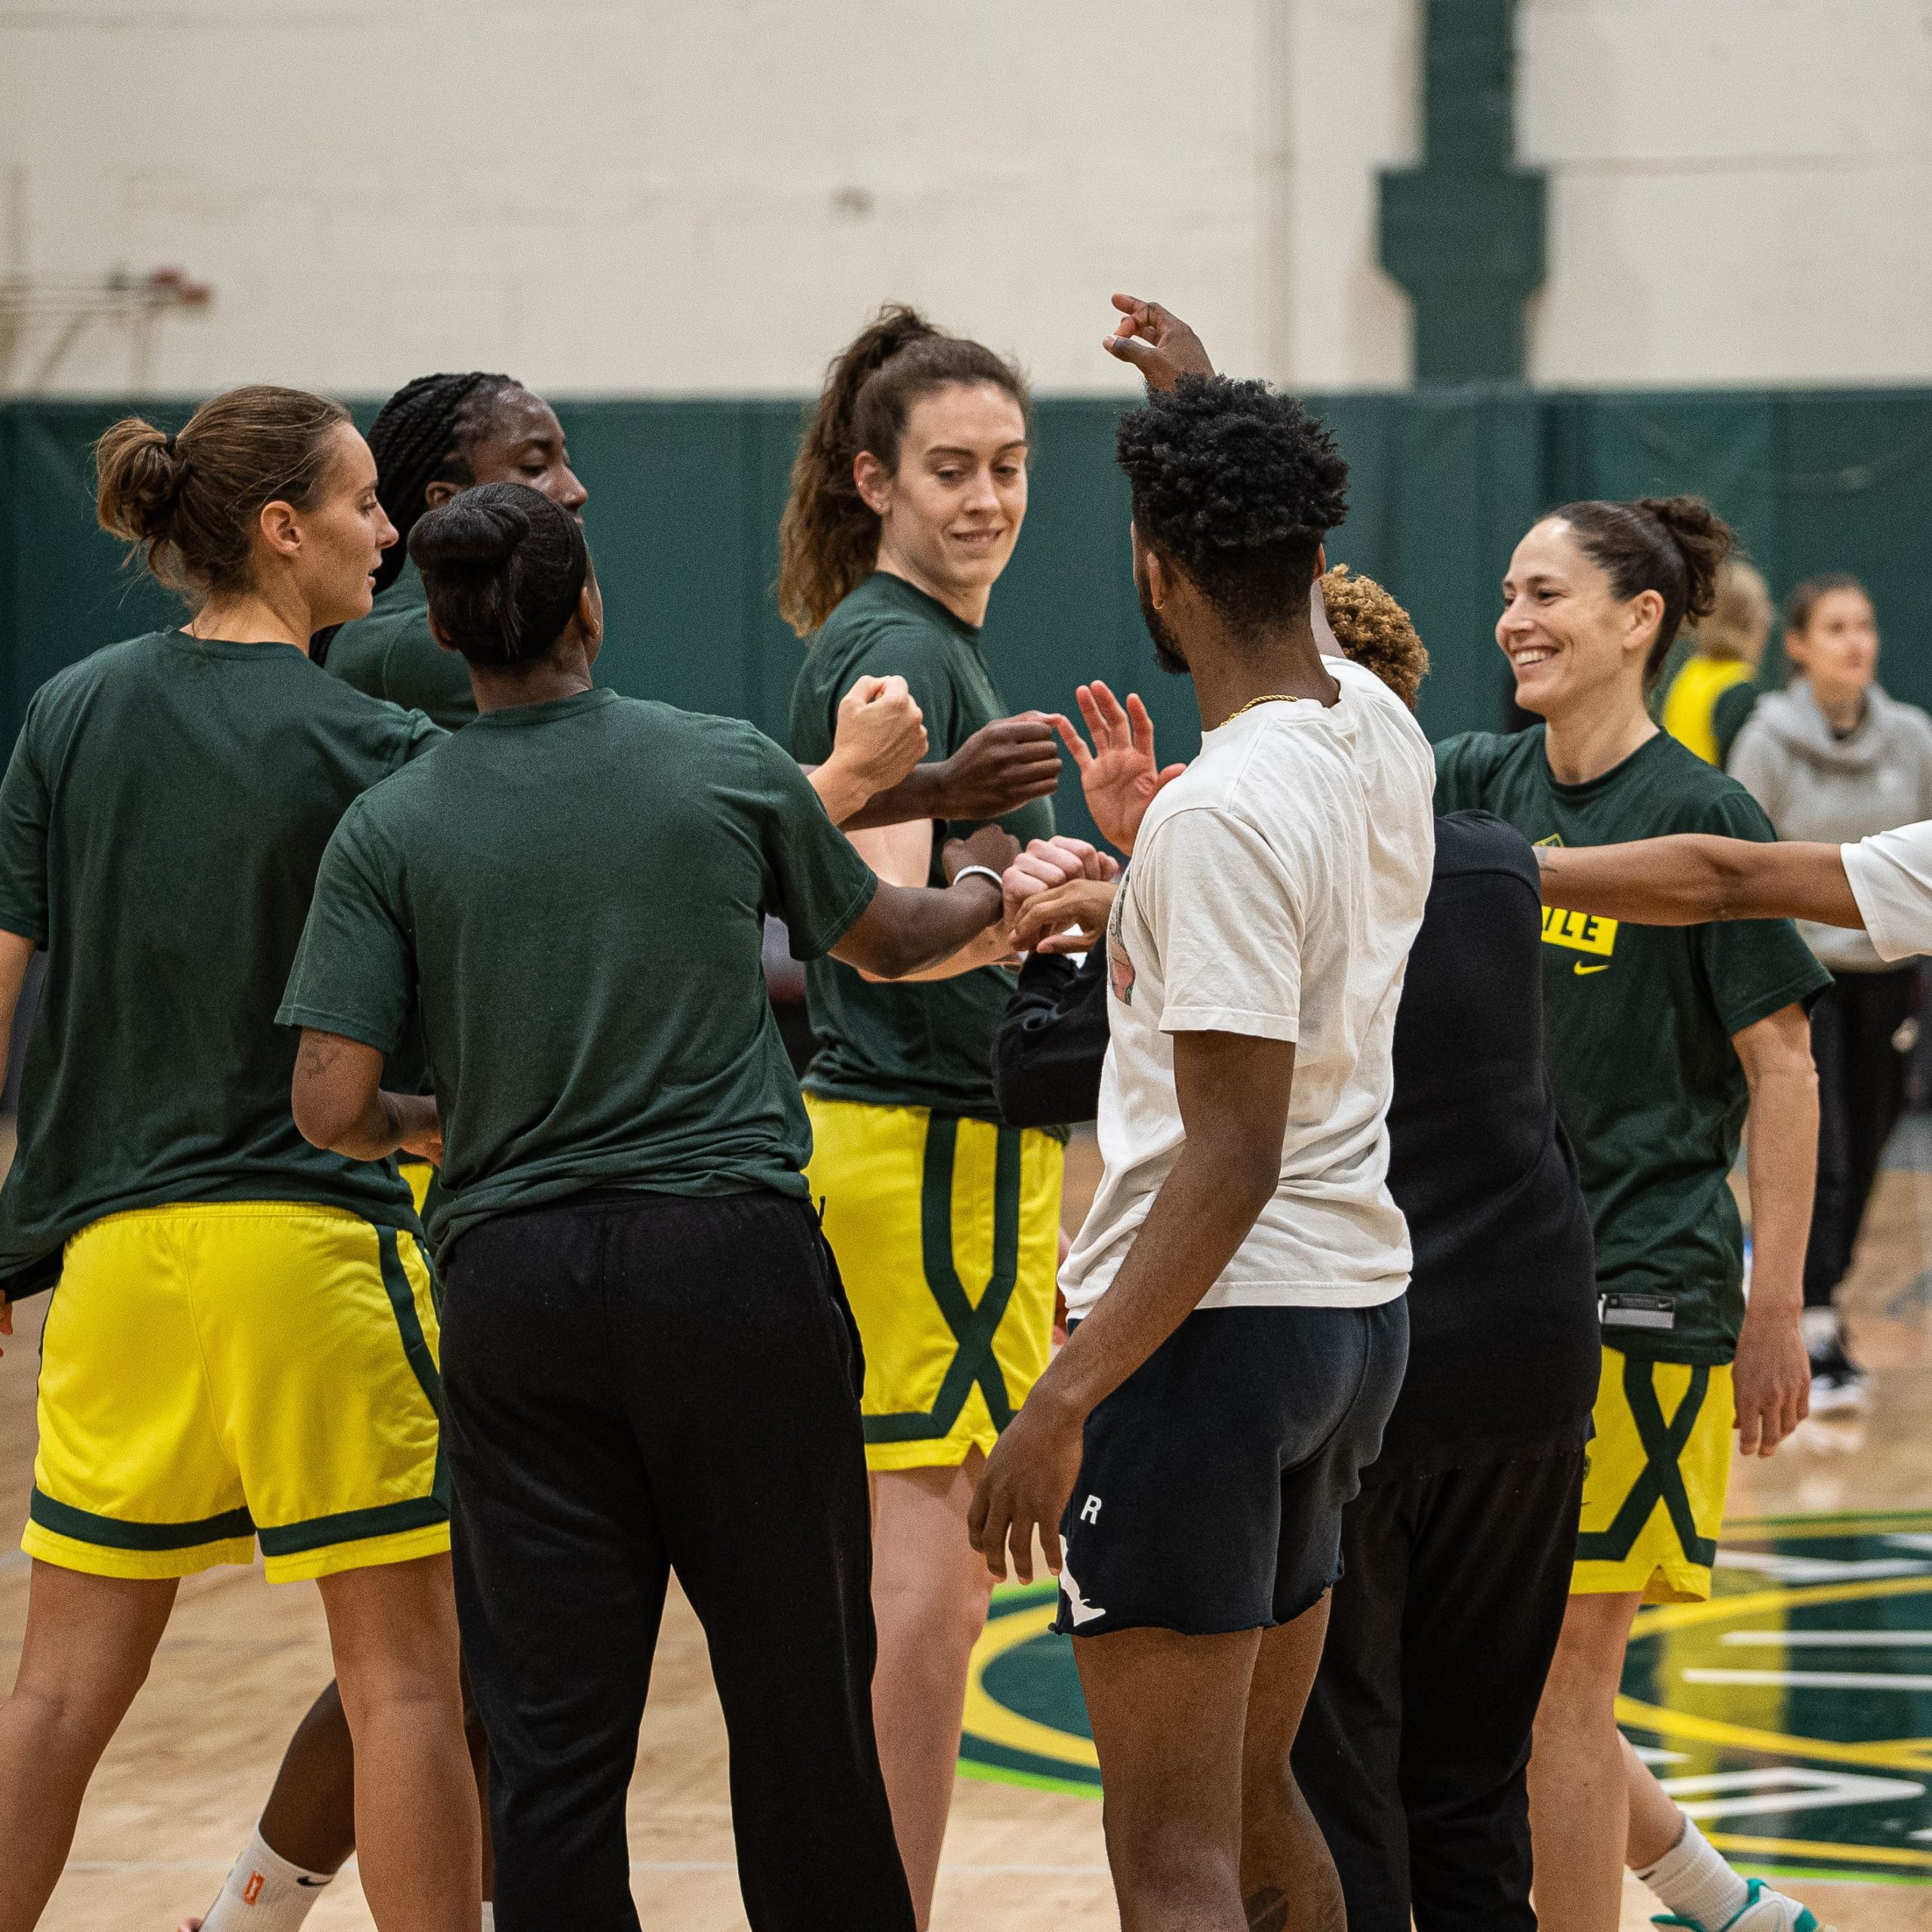 WNBA preview 2022: 6 players to watch as the season gets underway